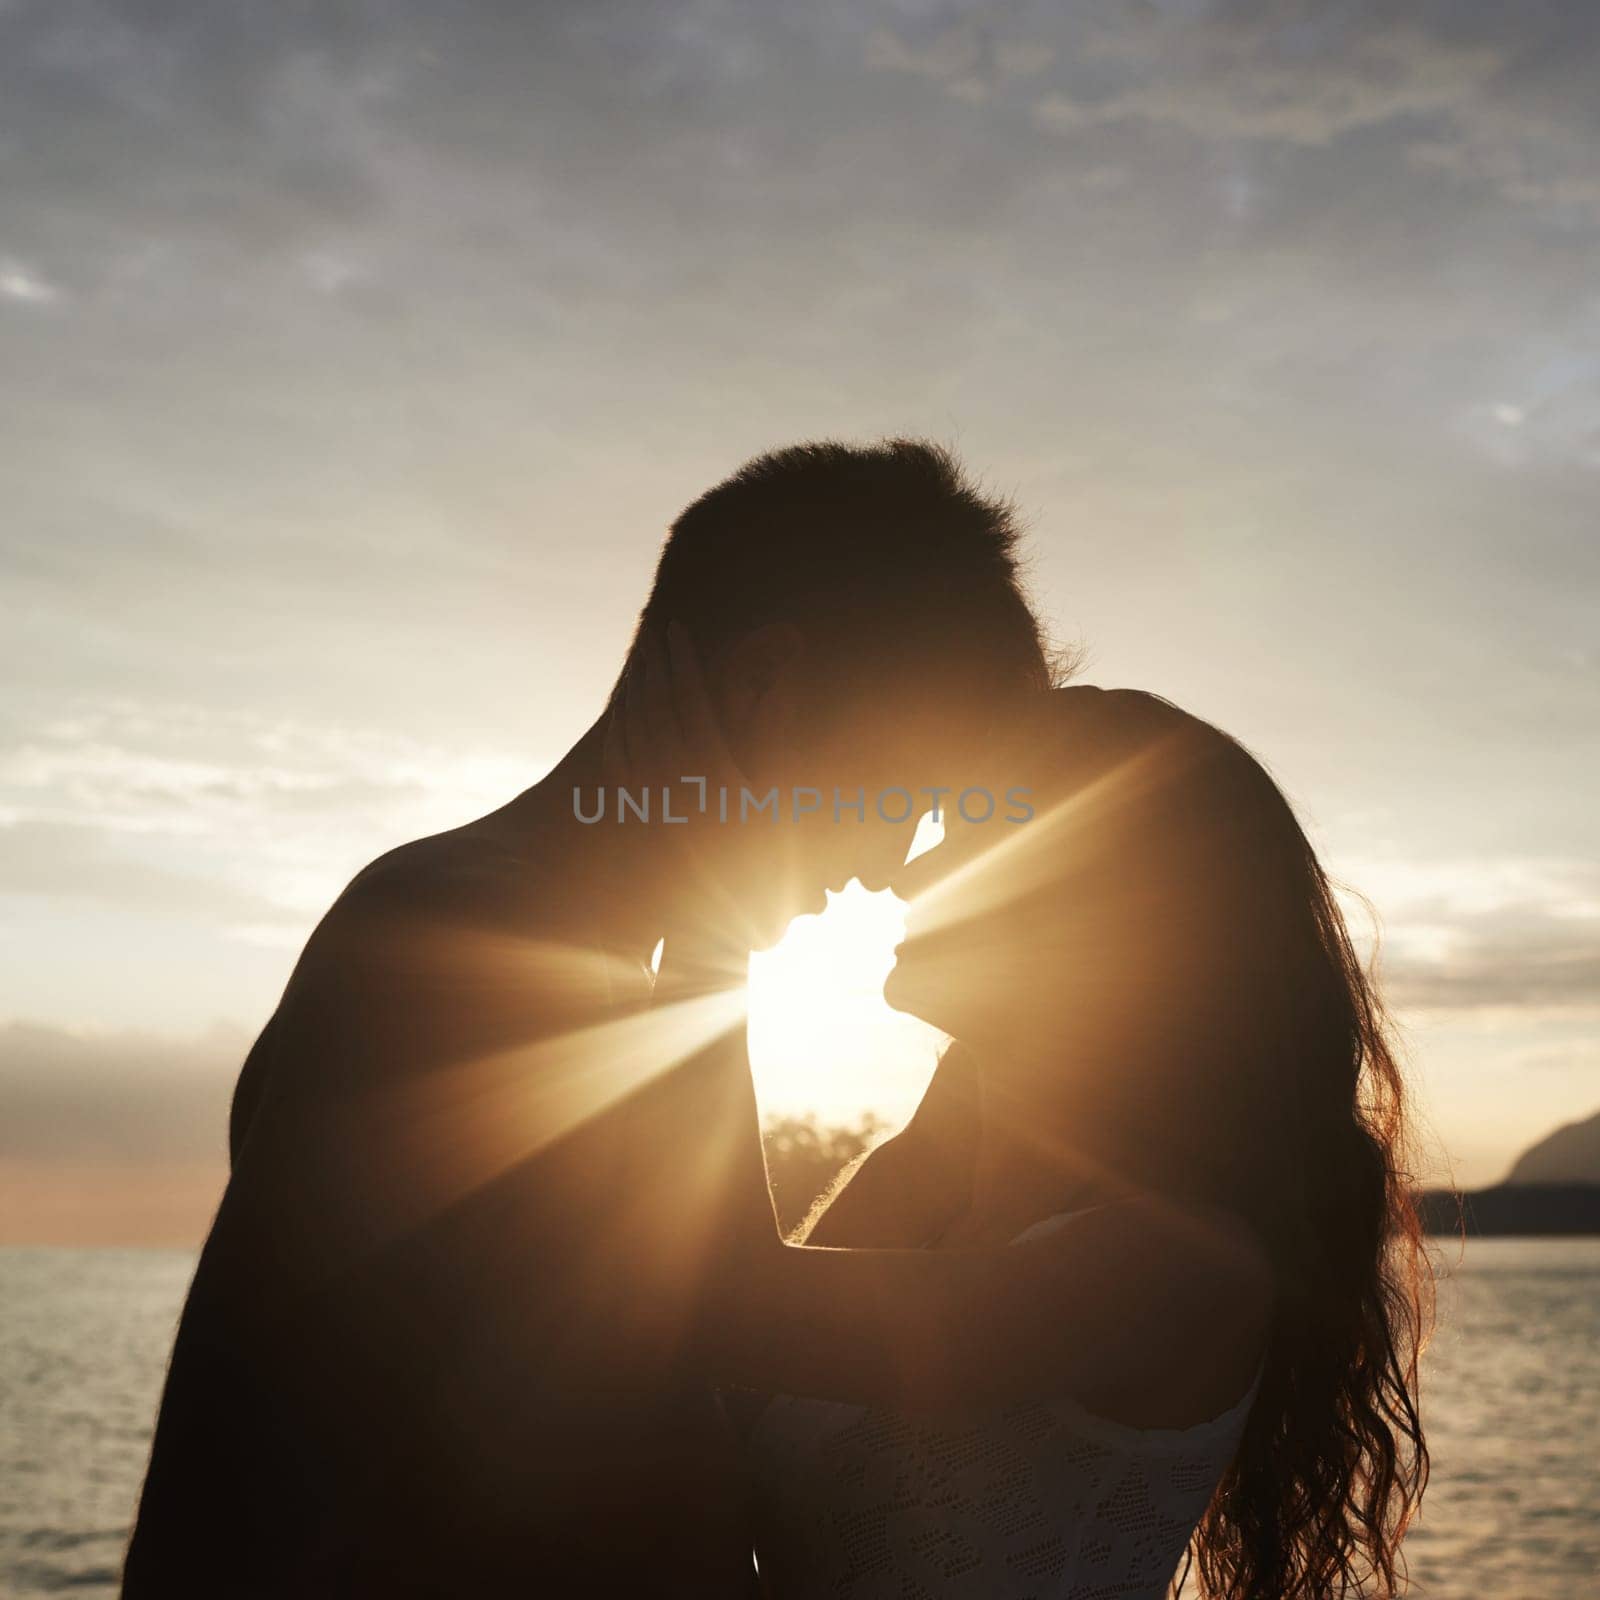 Silhouette, couple and face at ocean for sunset, vacation or travel together in summer on lens flare. Man, woman and romance at sea with shadow for connection, love and adventure by water outdoor by YuriArcurs